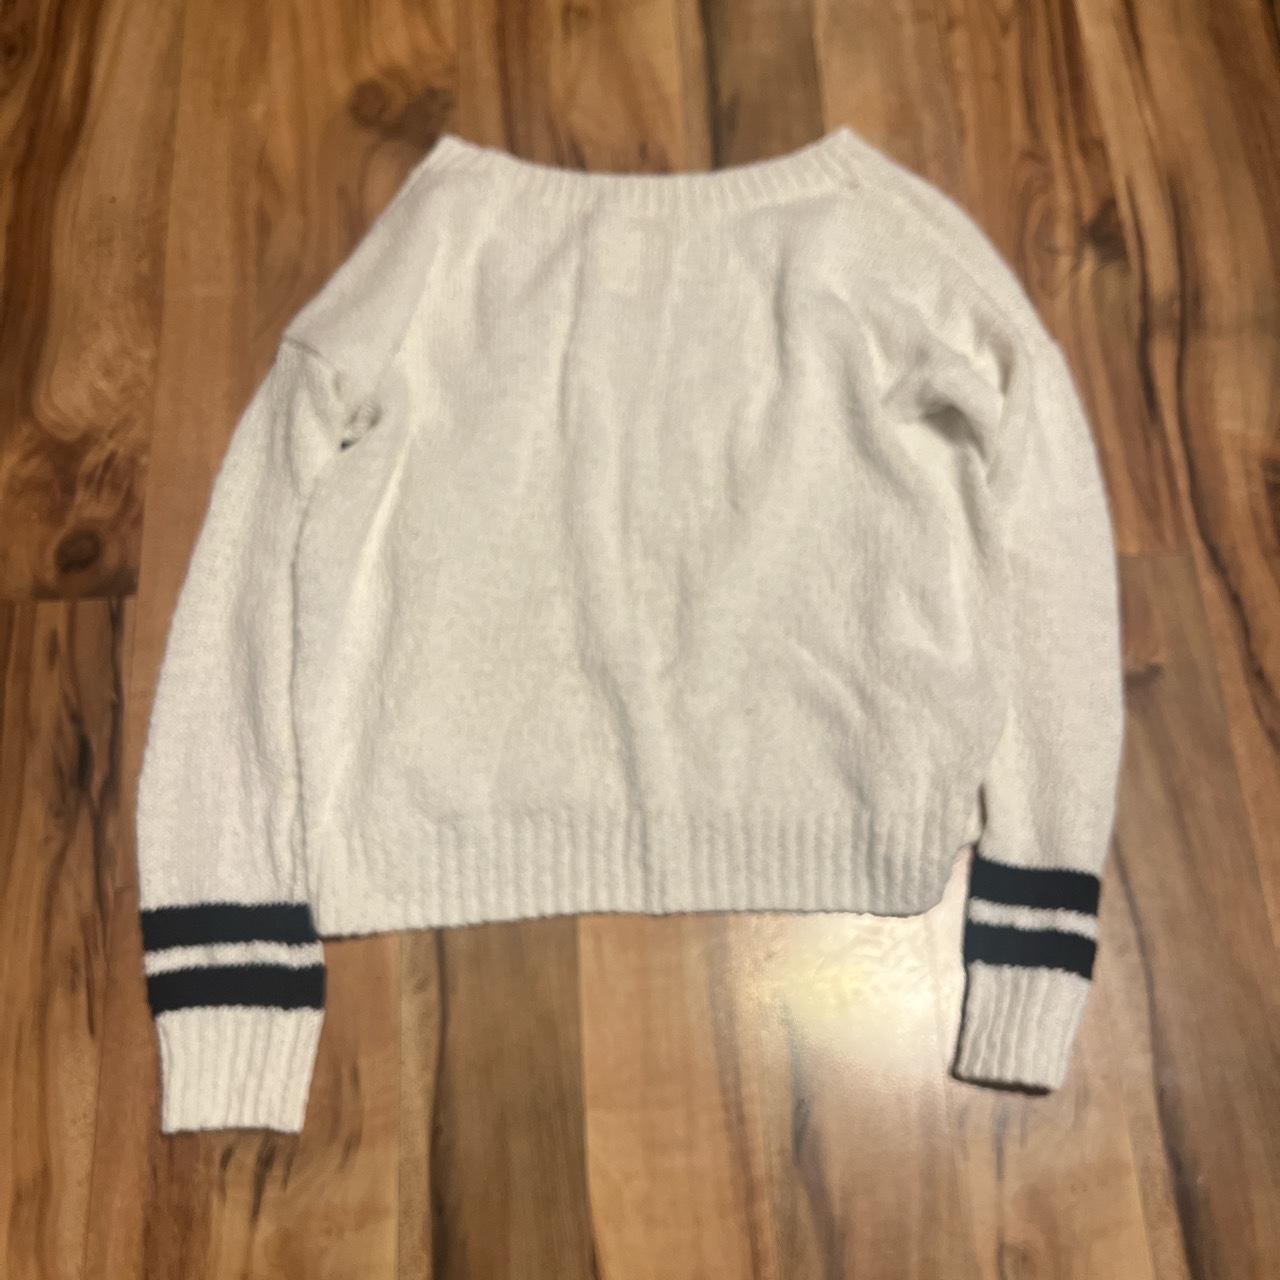 white sweater with blue stripes on sleeves great - Depop